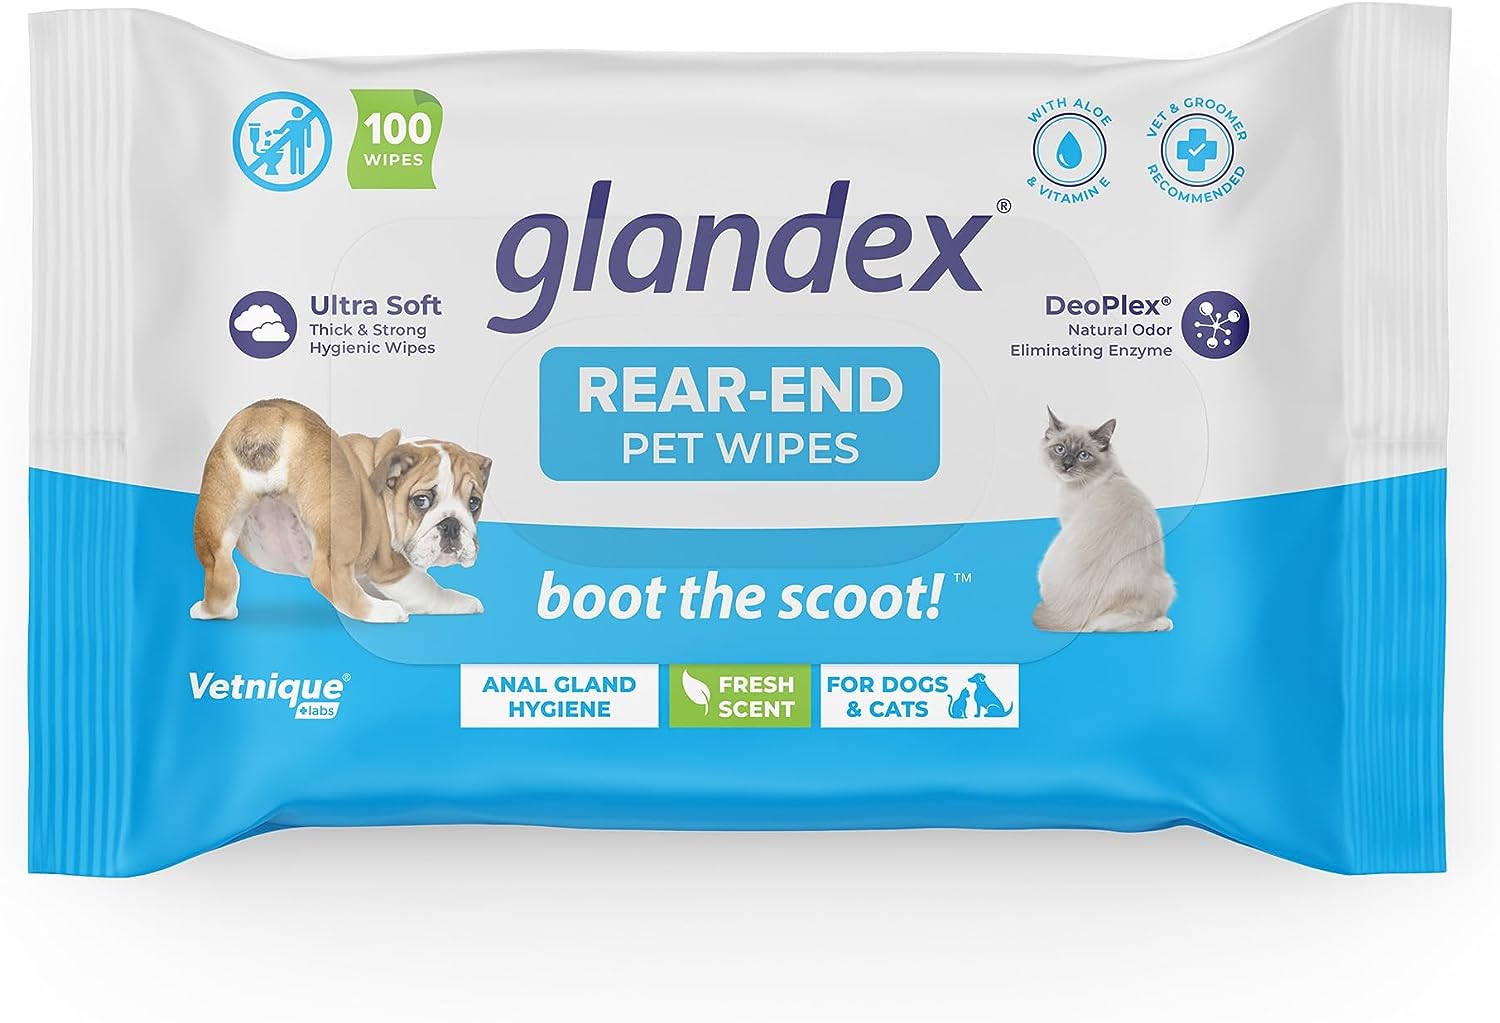 Vetnique Labs Glandex Dog Wipes for Pets Cleansing & Deodorizing Anal Gland Hygienic Wipe?s for Dogs & Cats with Vitamin E, Skin Conditioners and Aloe (100ct Pouch)